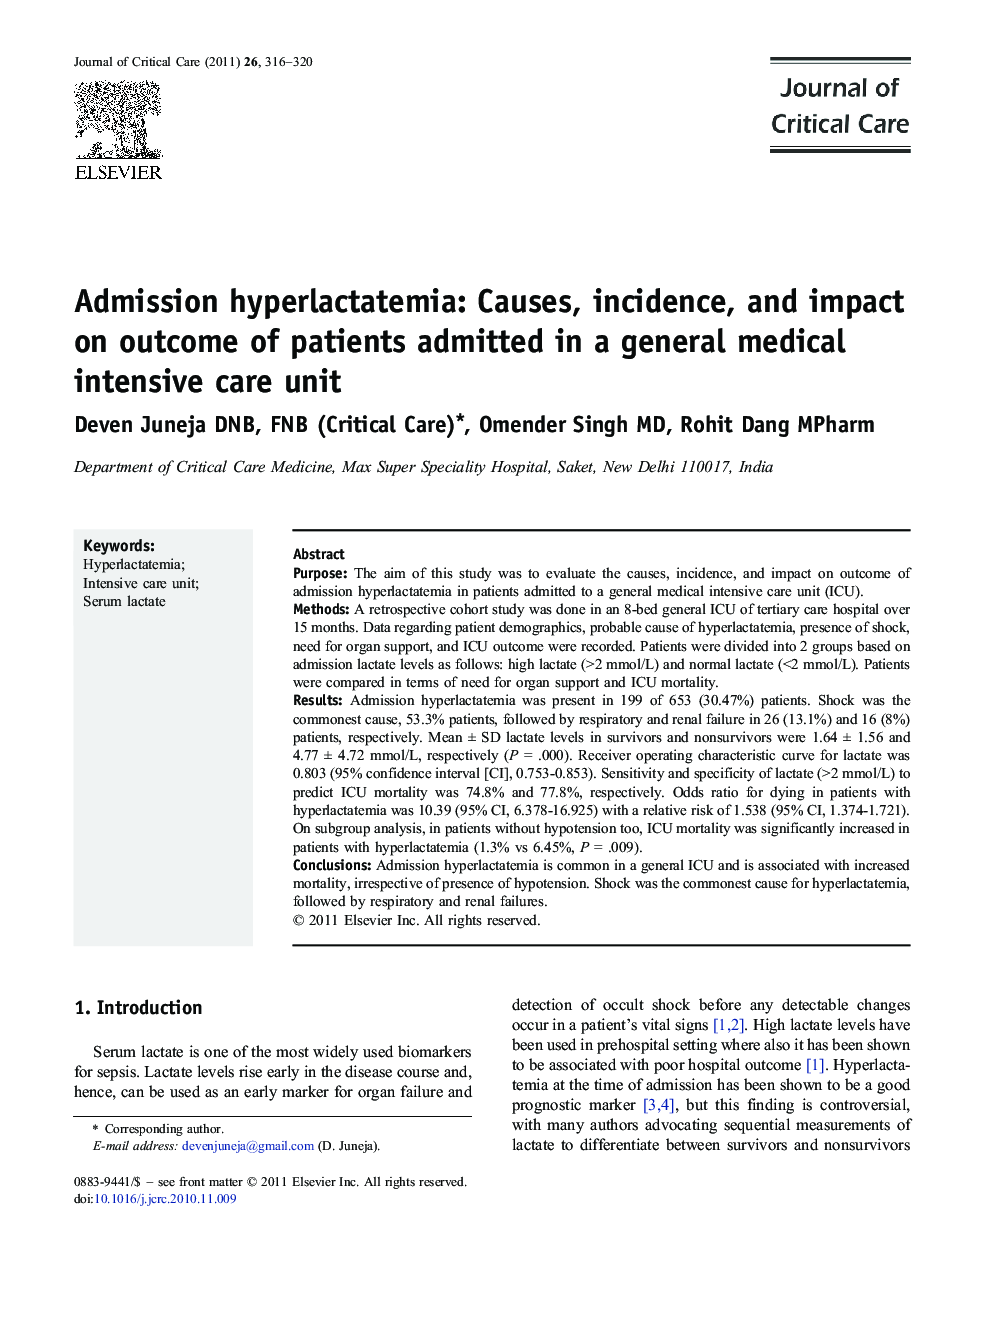 Admission hyperlactatemia: Causes, incidence, and impact on outcome of patients admitted in a general medical intensive care unit